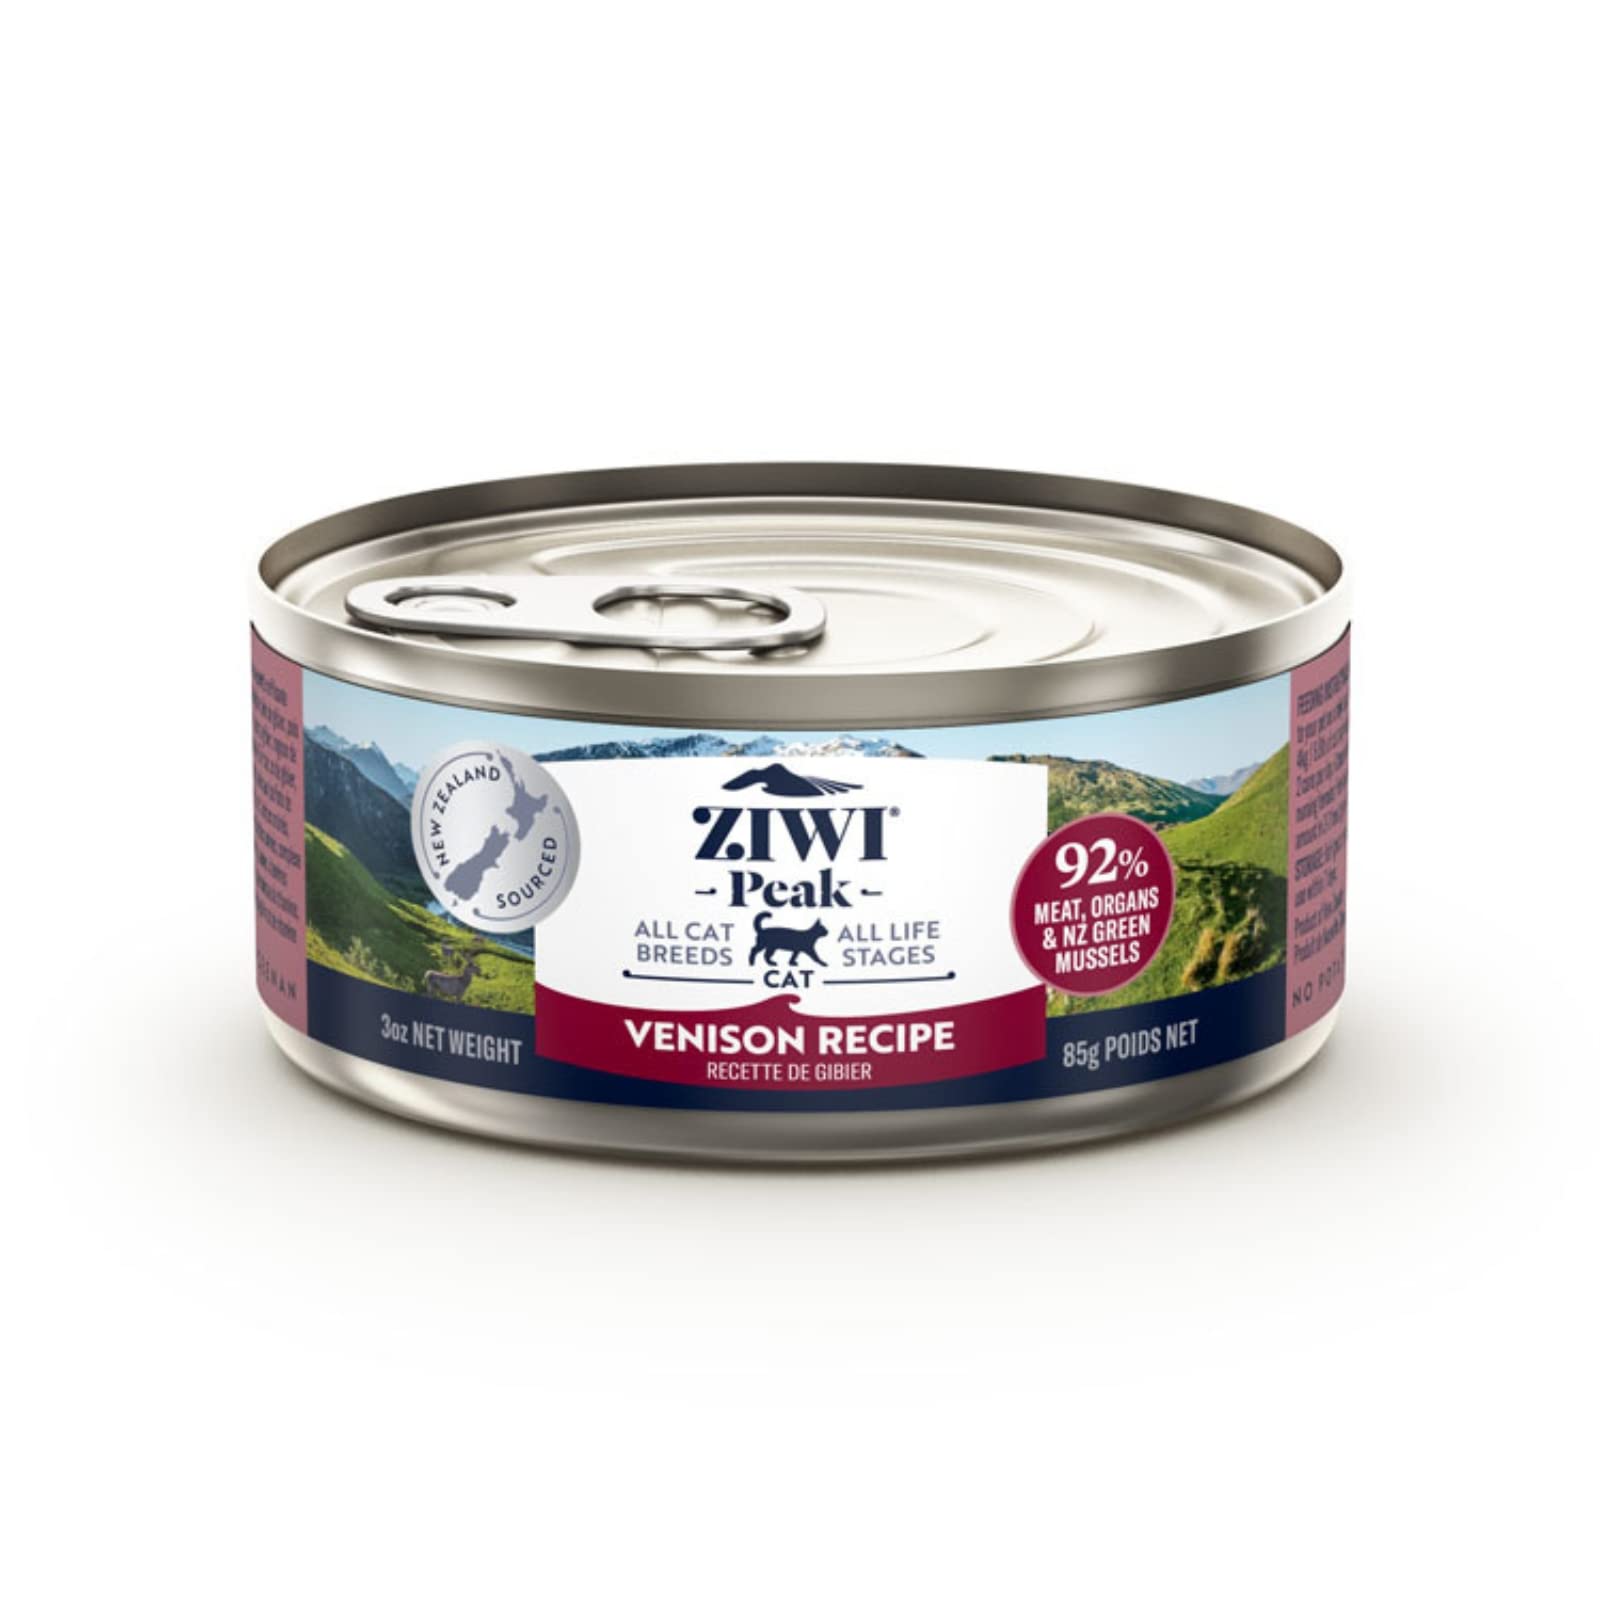 ZIWI Peak Canned Wet Cat Food – All Natural, High Prote...